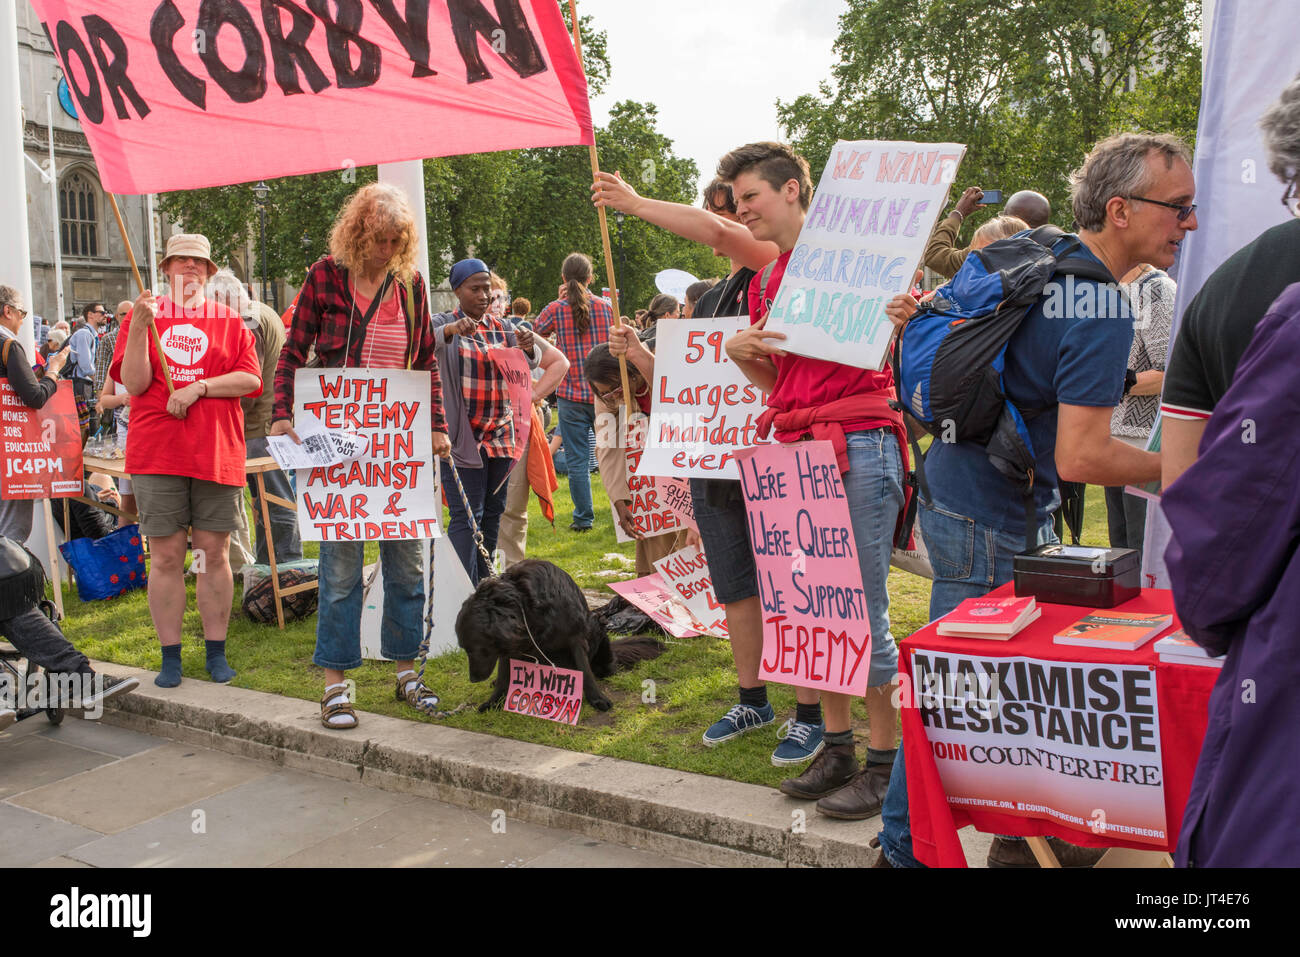 Women supporters of Jeremy Corbyn with different banners pledging allegiance to the Labour leader . A black Labrador has its own sign around its neck. Stock Photo